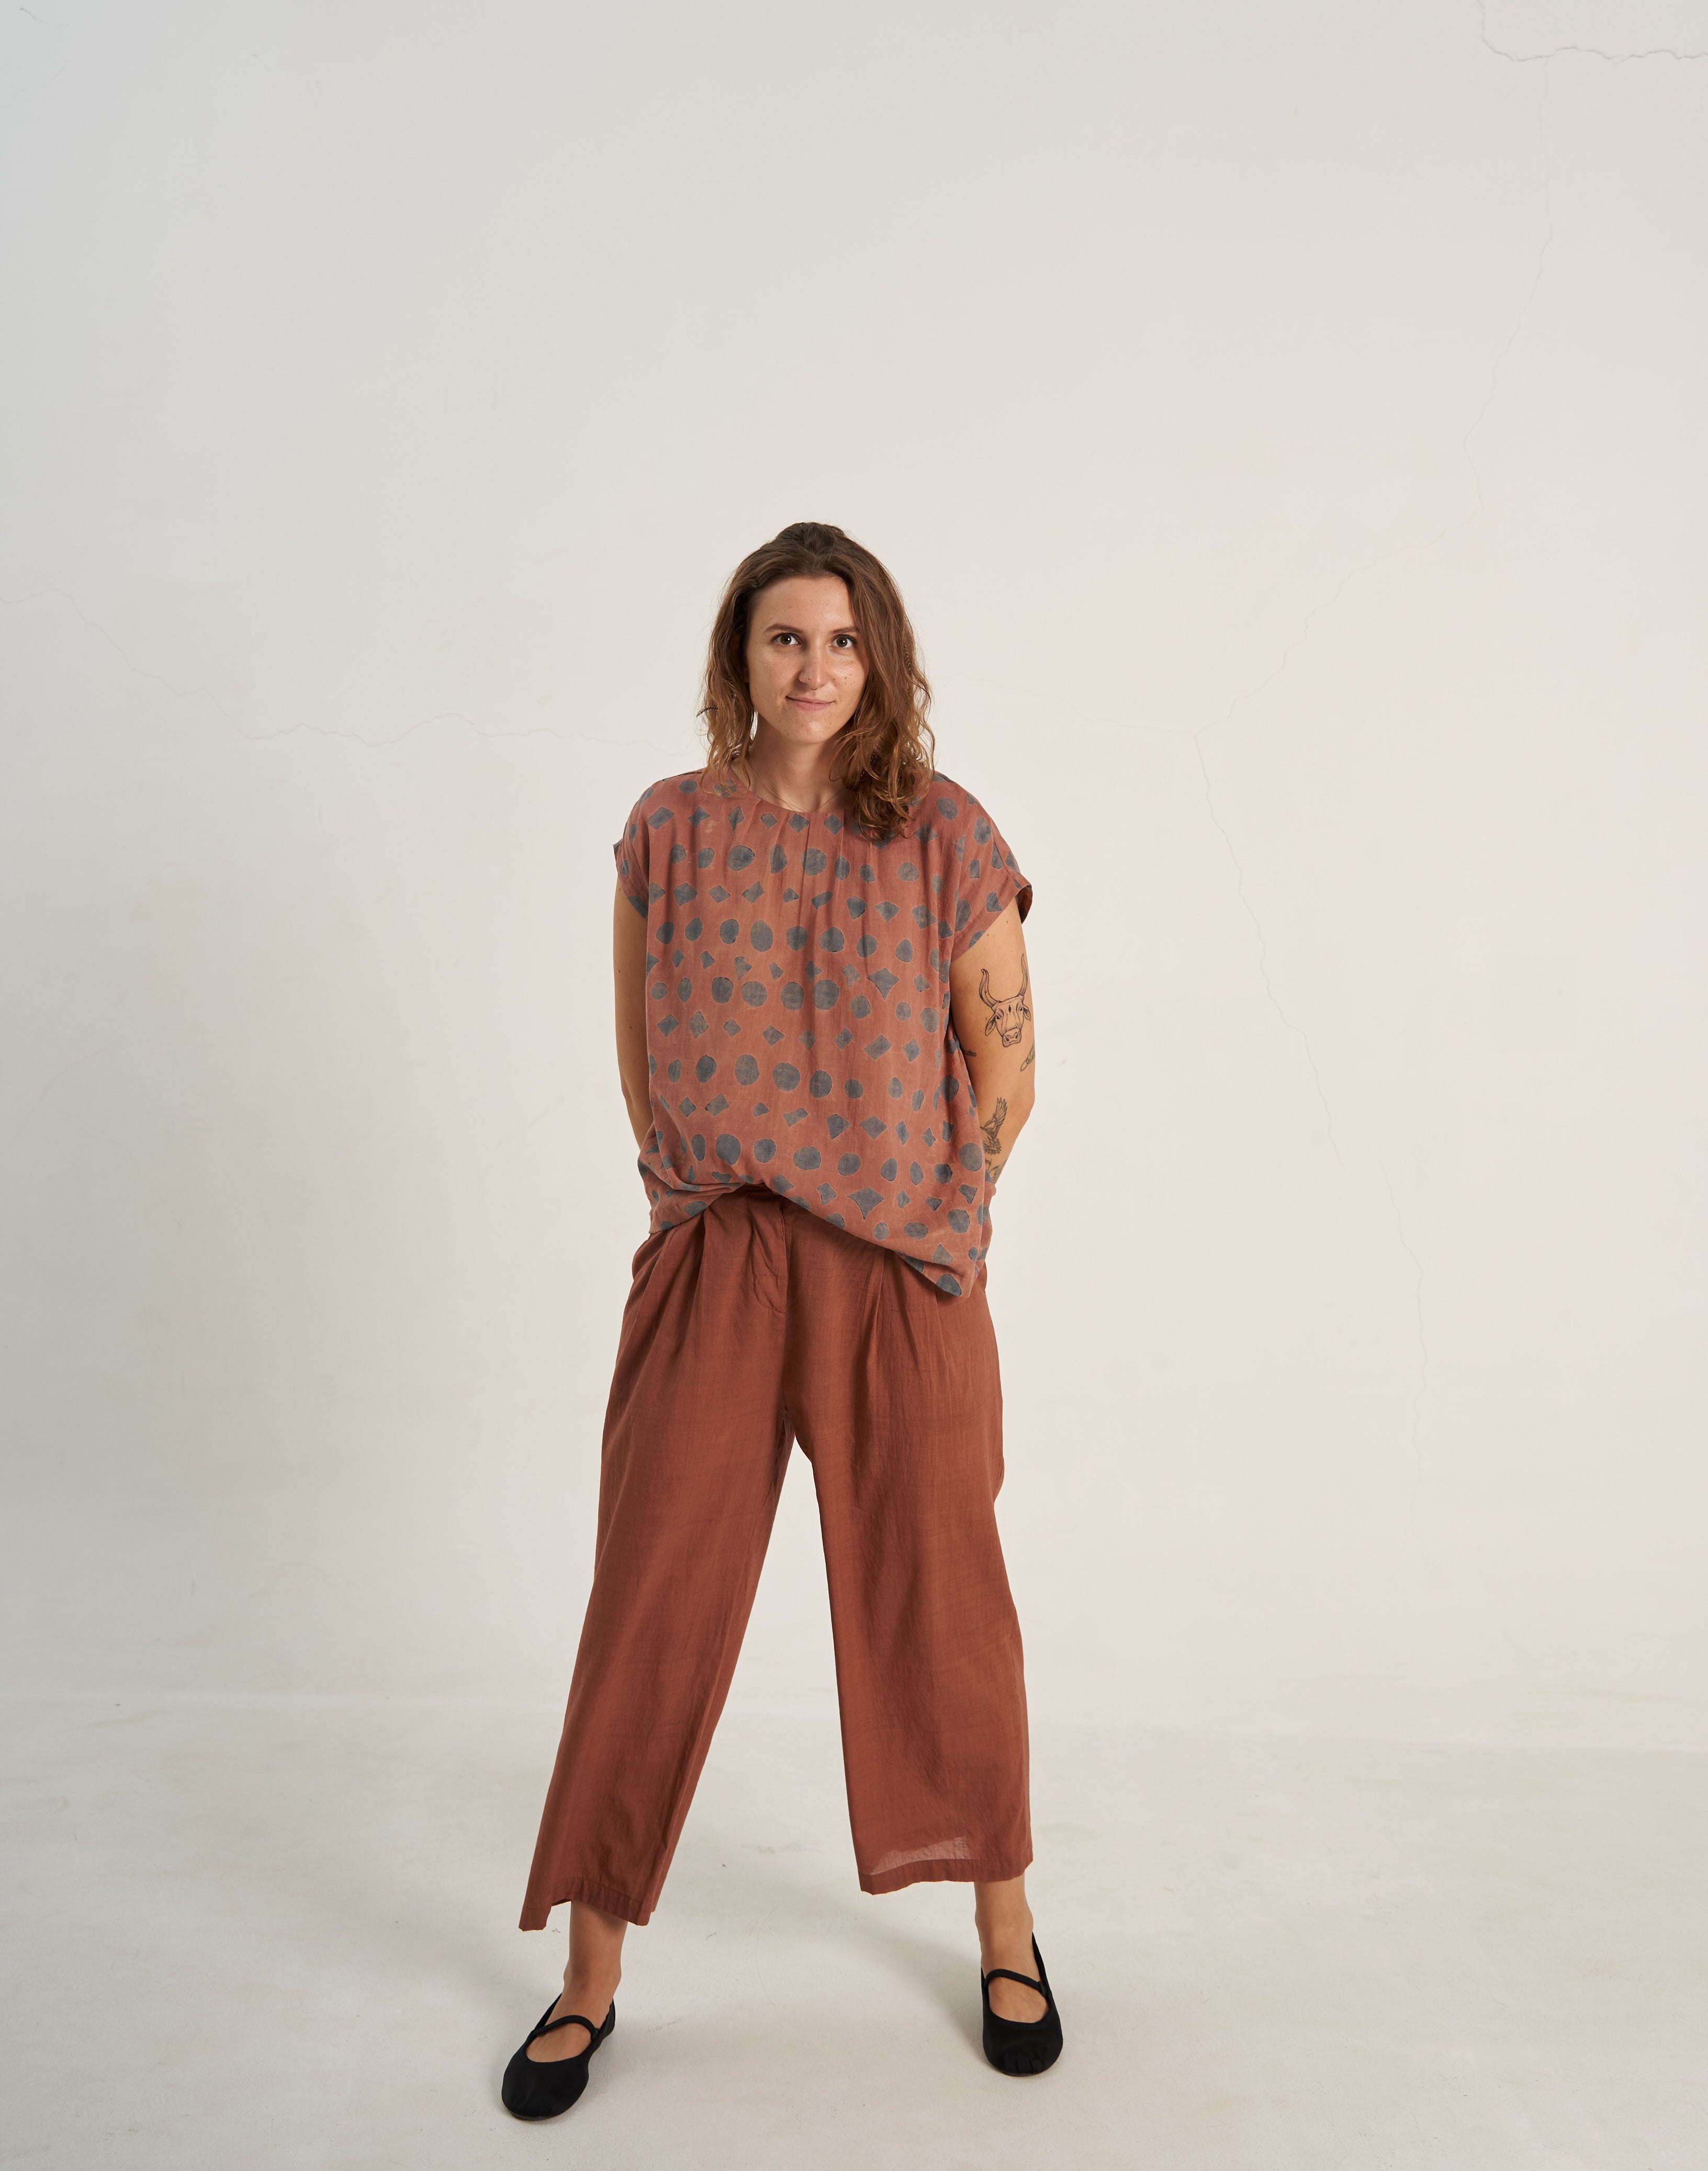 Dyegold Linen Pants For Women Casual Tapered Pants Drawstring Elastic Waist  Loose Lightweight Summer Trousers With Pocket - Walmart.com